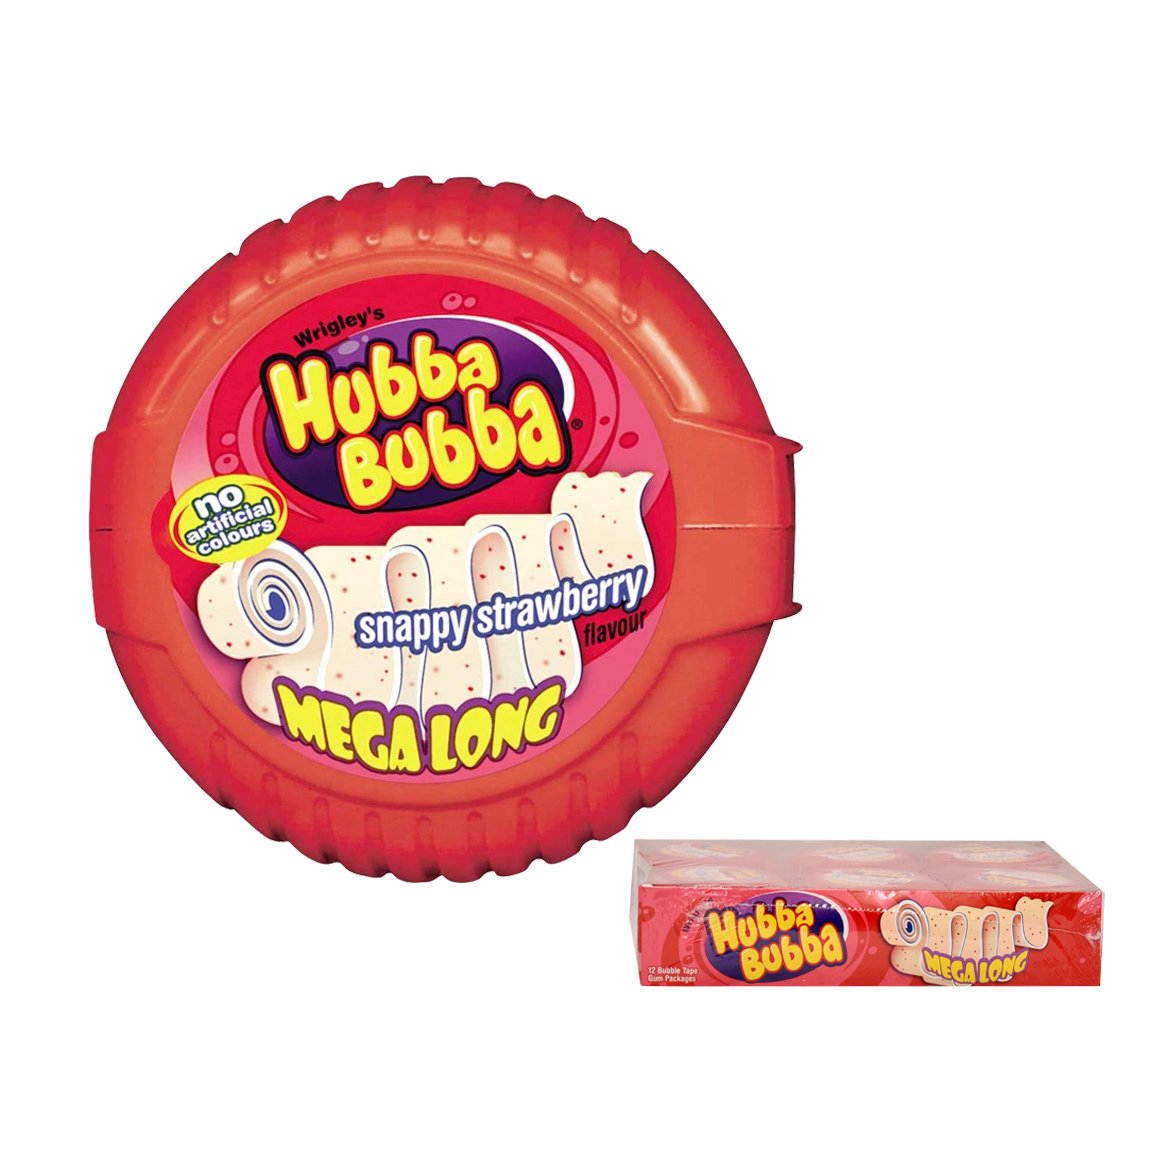 Hubba Bubba Snappy Strawberry 12x56g Mega Long Tape Chewing Gums Box